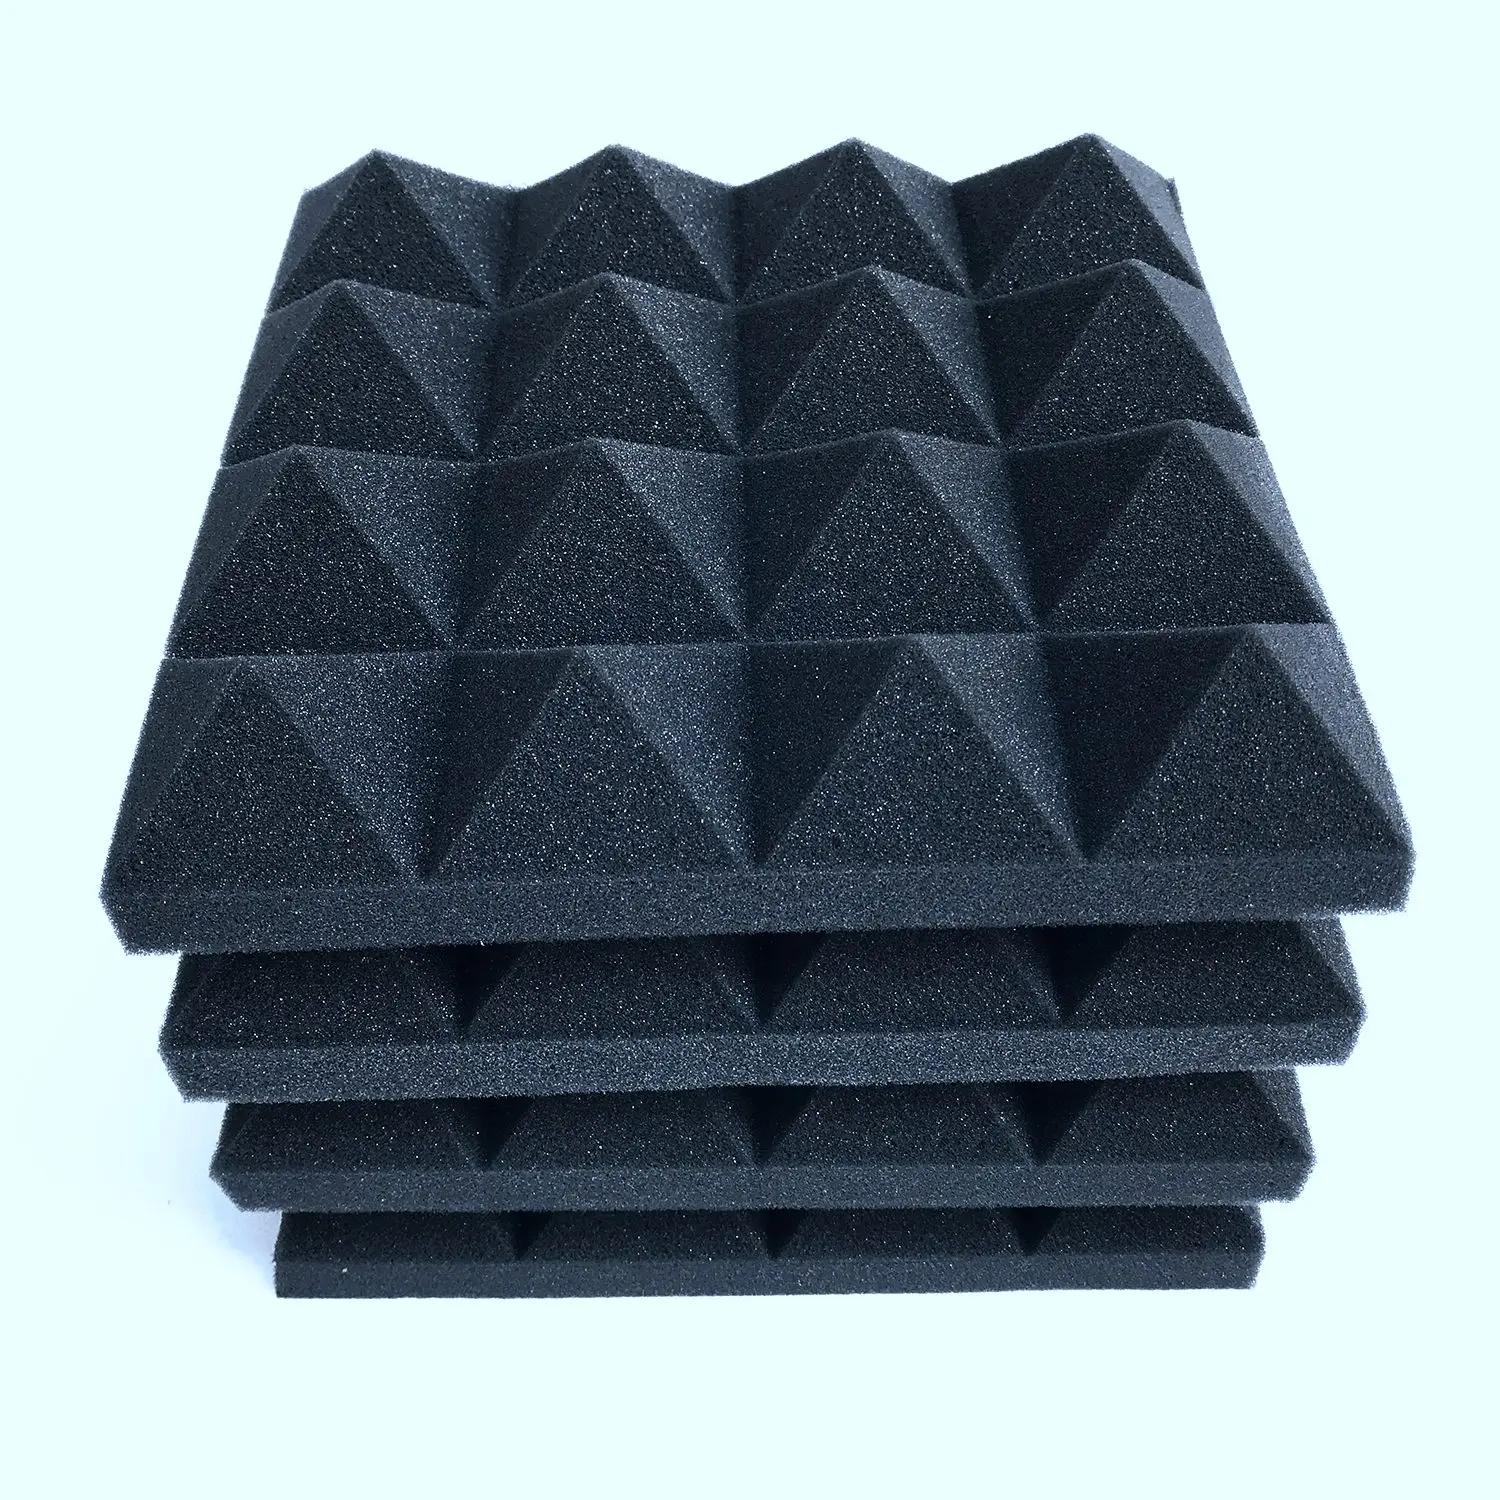 2 X 12 X 12 Foamily 6 Pack Ice Blue/Charcoal Acoustic Foam Sound Absorption Pyramid Studio Treatment Wall Panels 